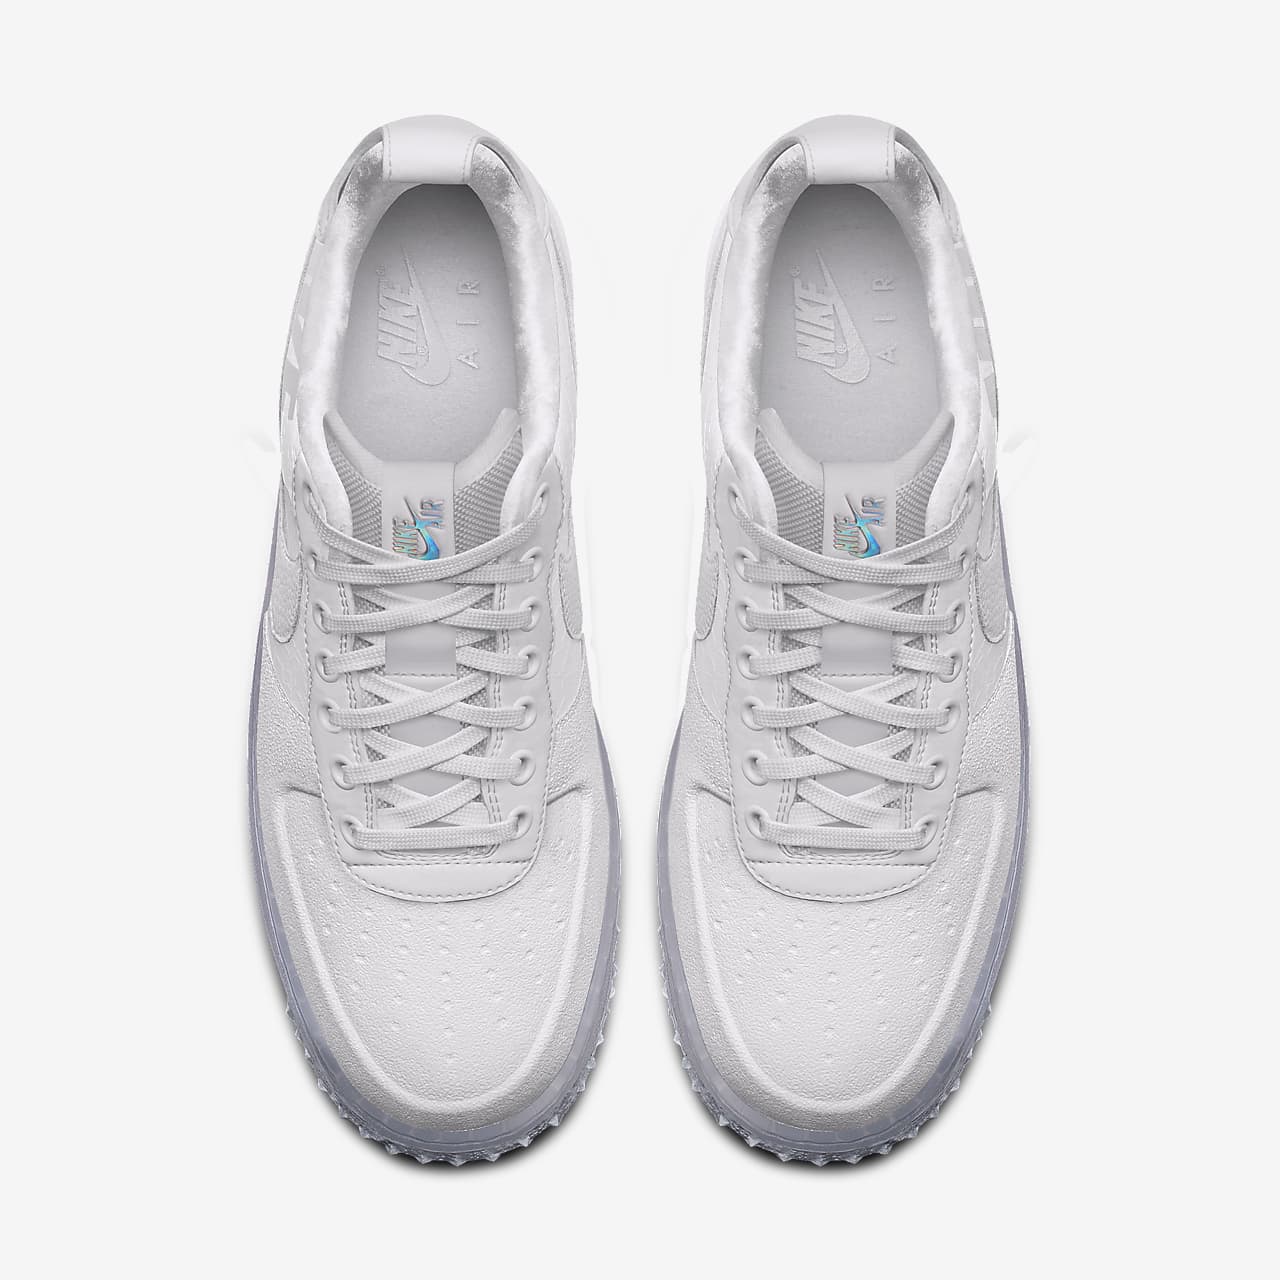 air force one winter white